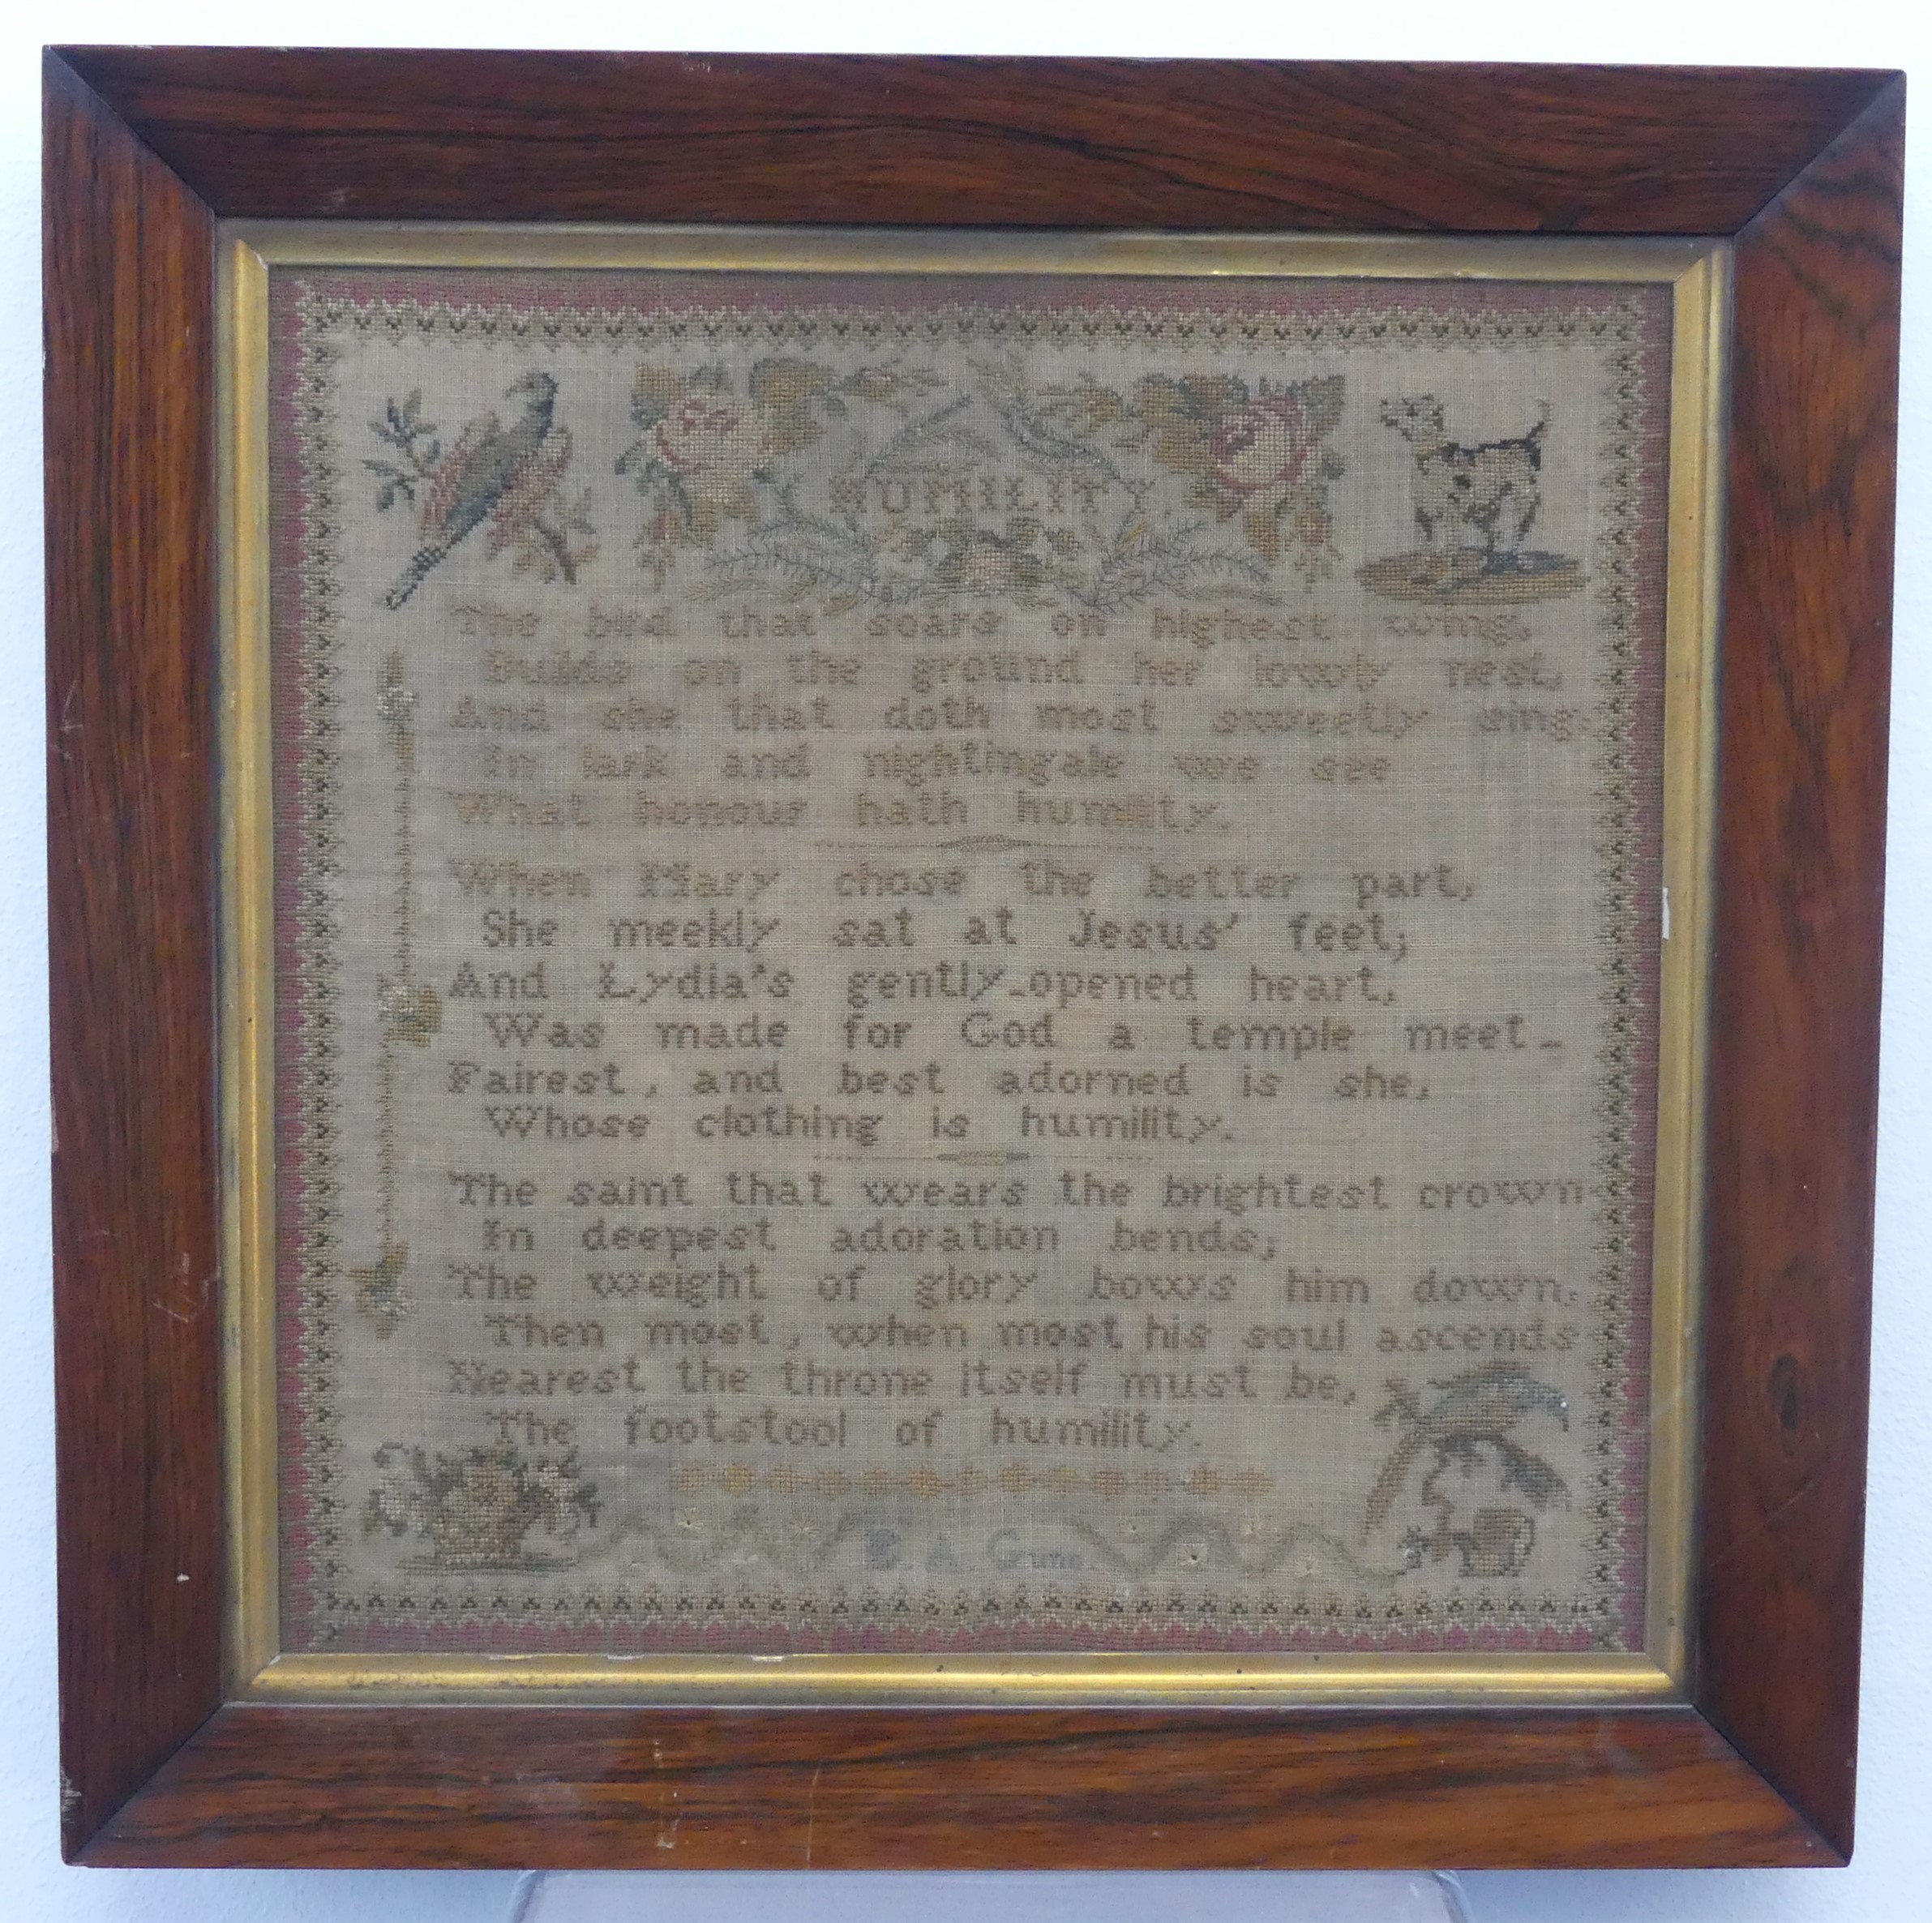 A needlework Sampler,19th century, English, worked by 'E. A. Gunn', with verses from James